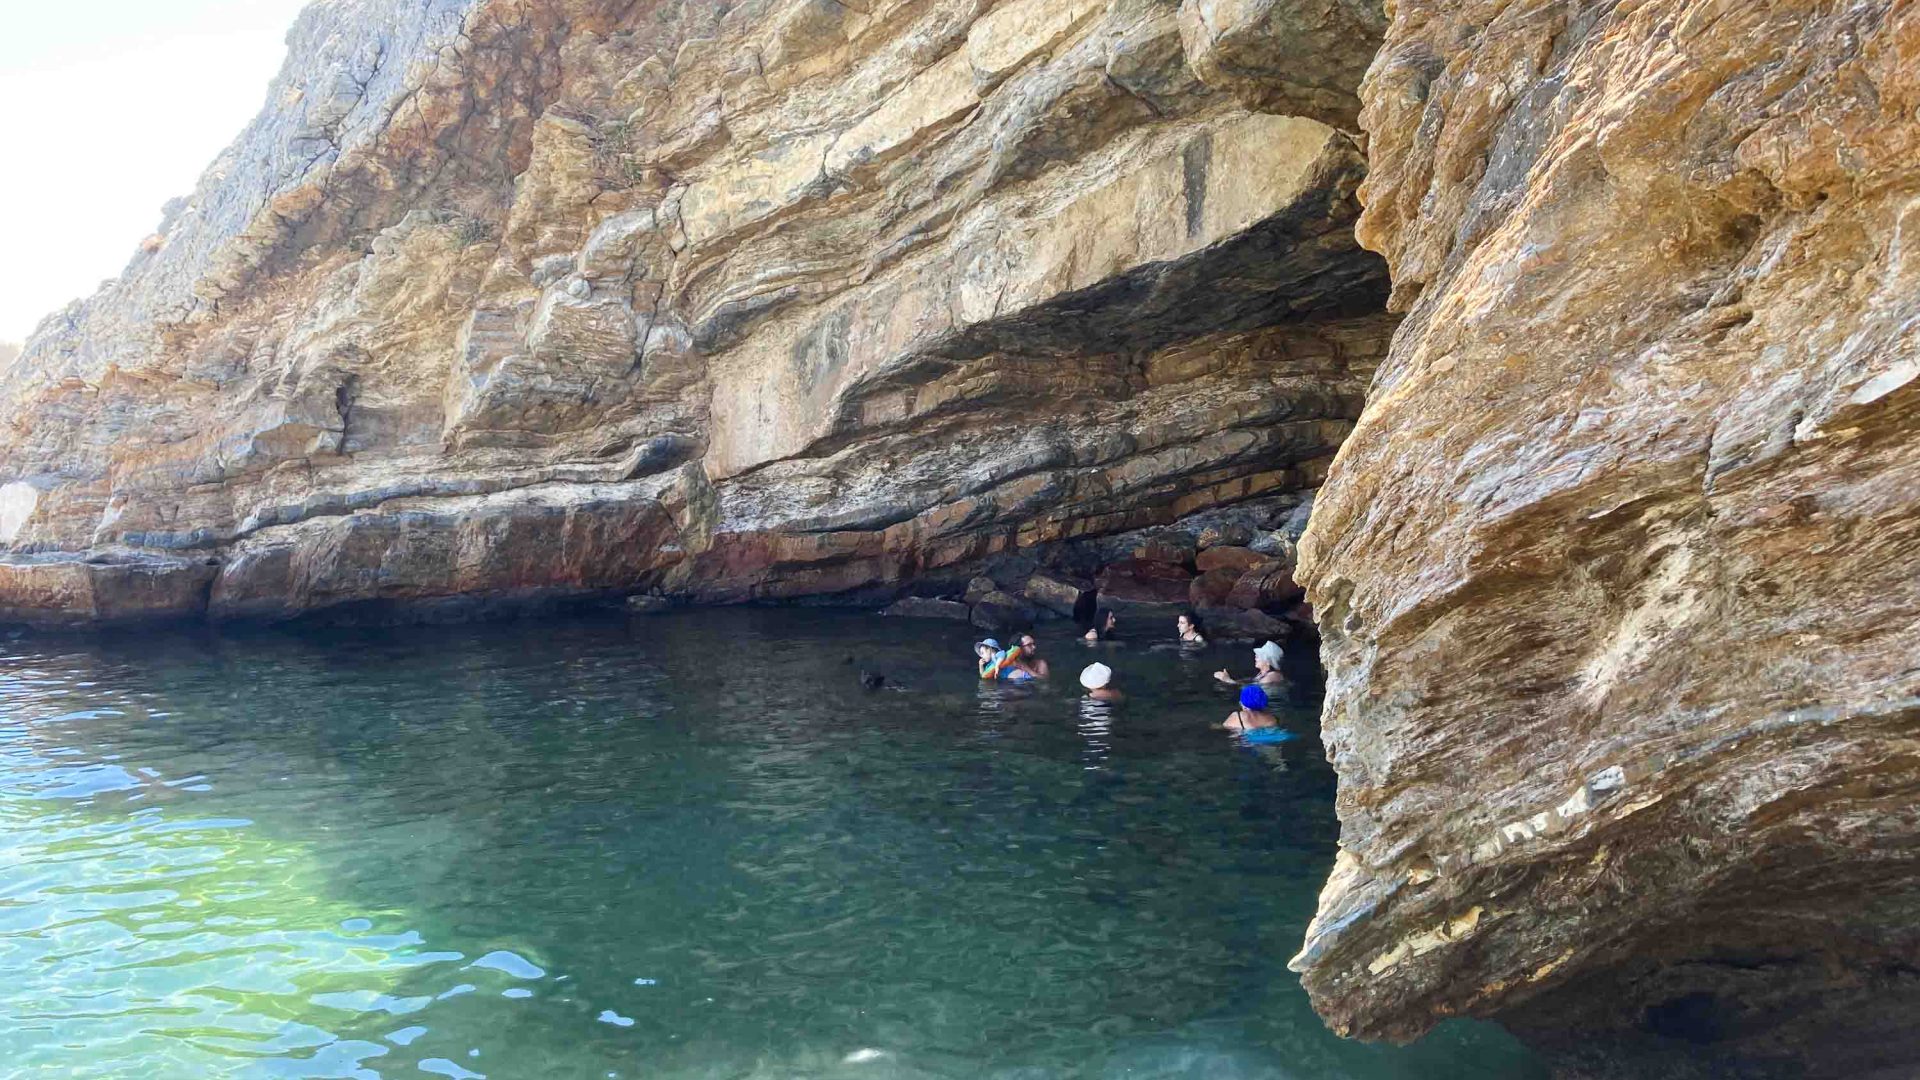 People paddle through blue water under a cave.